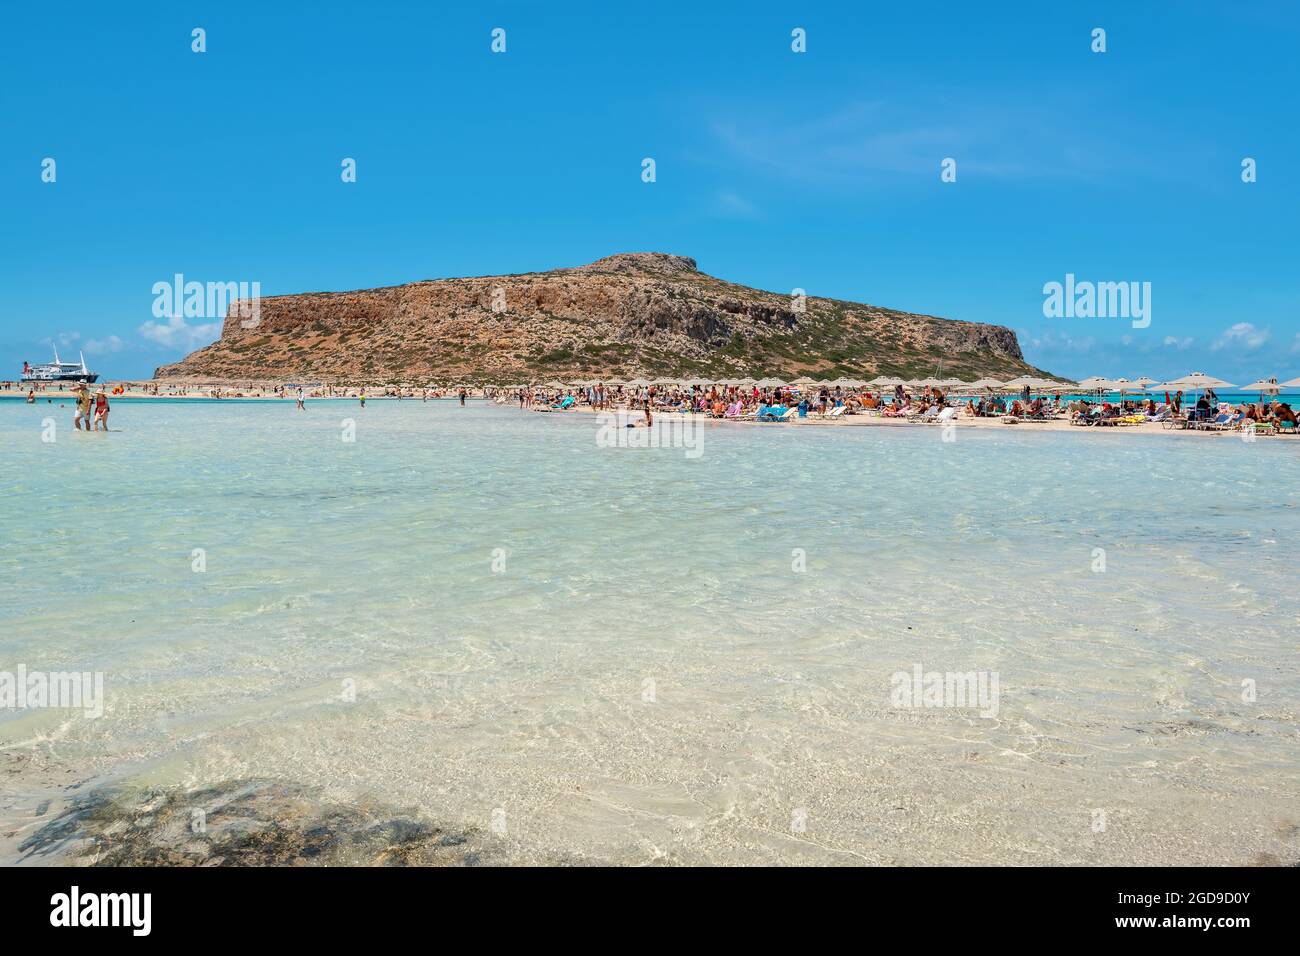 Holidaymakers sunbathing on picturesque Balos beach. Crete, Greece Stock Photo